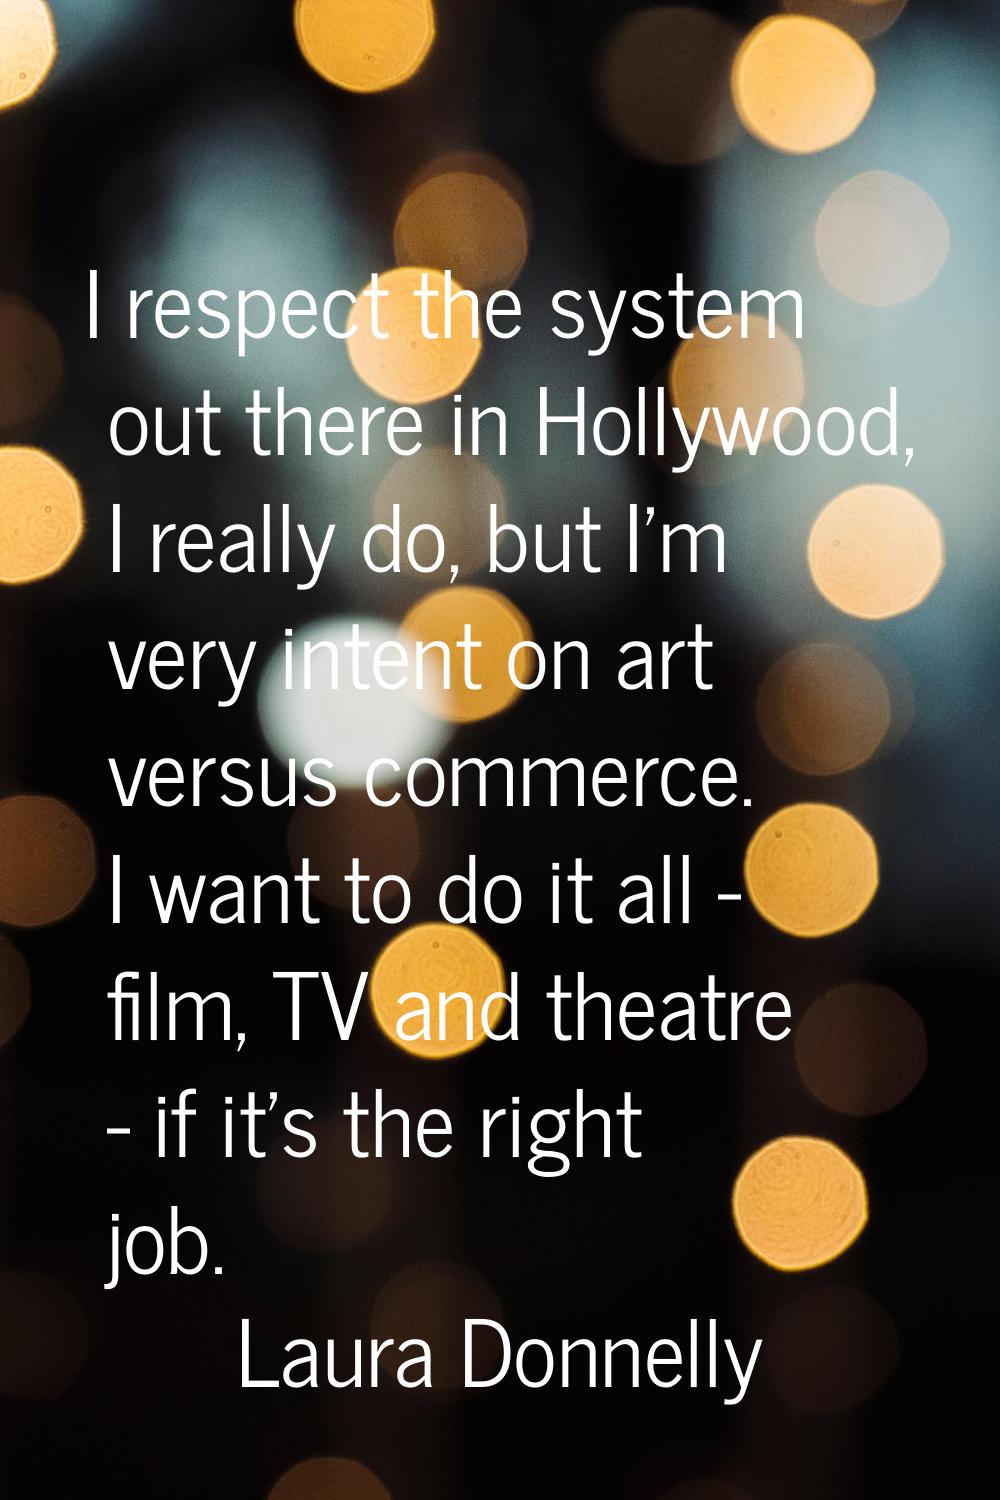 I respect the system out there in Hollywood, I really do, but I'm very intent on art versus commerc